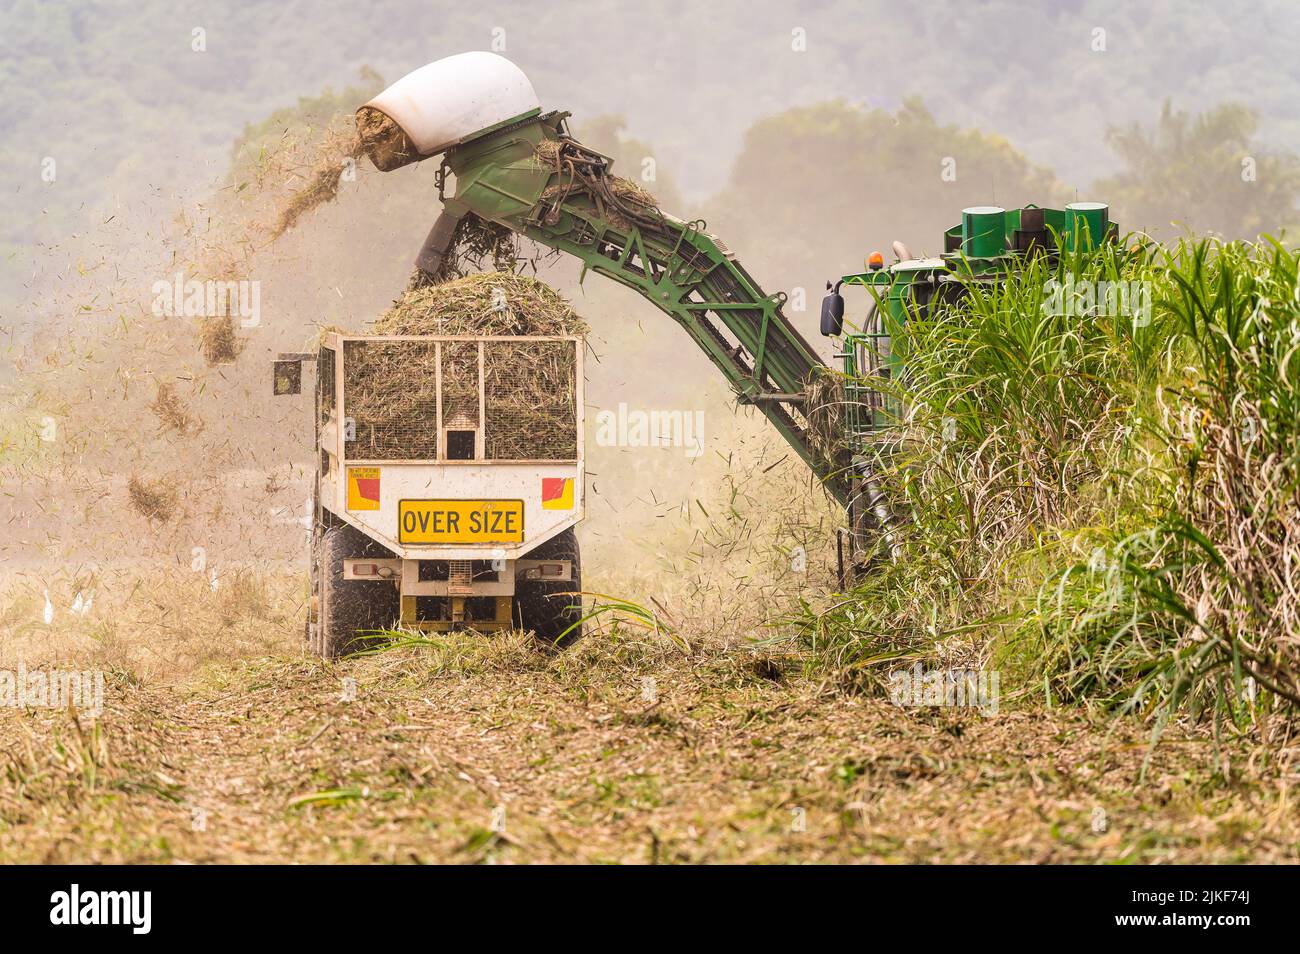 Sugar Cane farm workers in a cane harvester and a following cane bin as they move up and down the field harvesting ripe cane in Cairns, Qld, Australia. Stock Photo